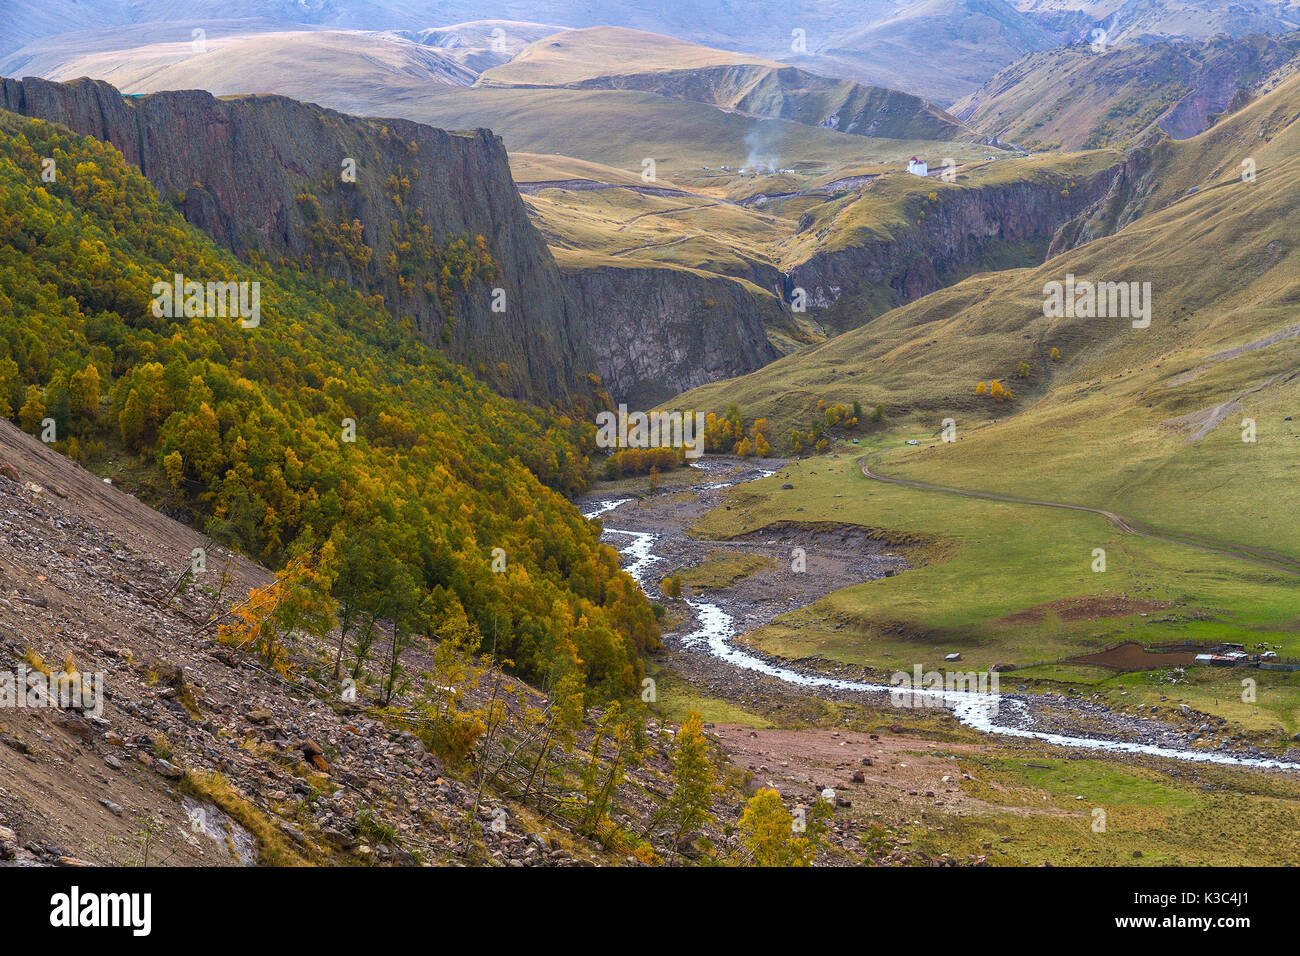 Autumn mountain landscape: hill slopes covered by dry plants and trees with yellow and green foliage, valley with a river and mountains in fog at the  Stock Photo